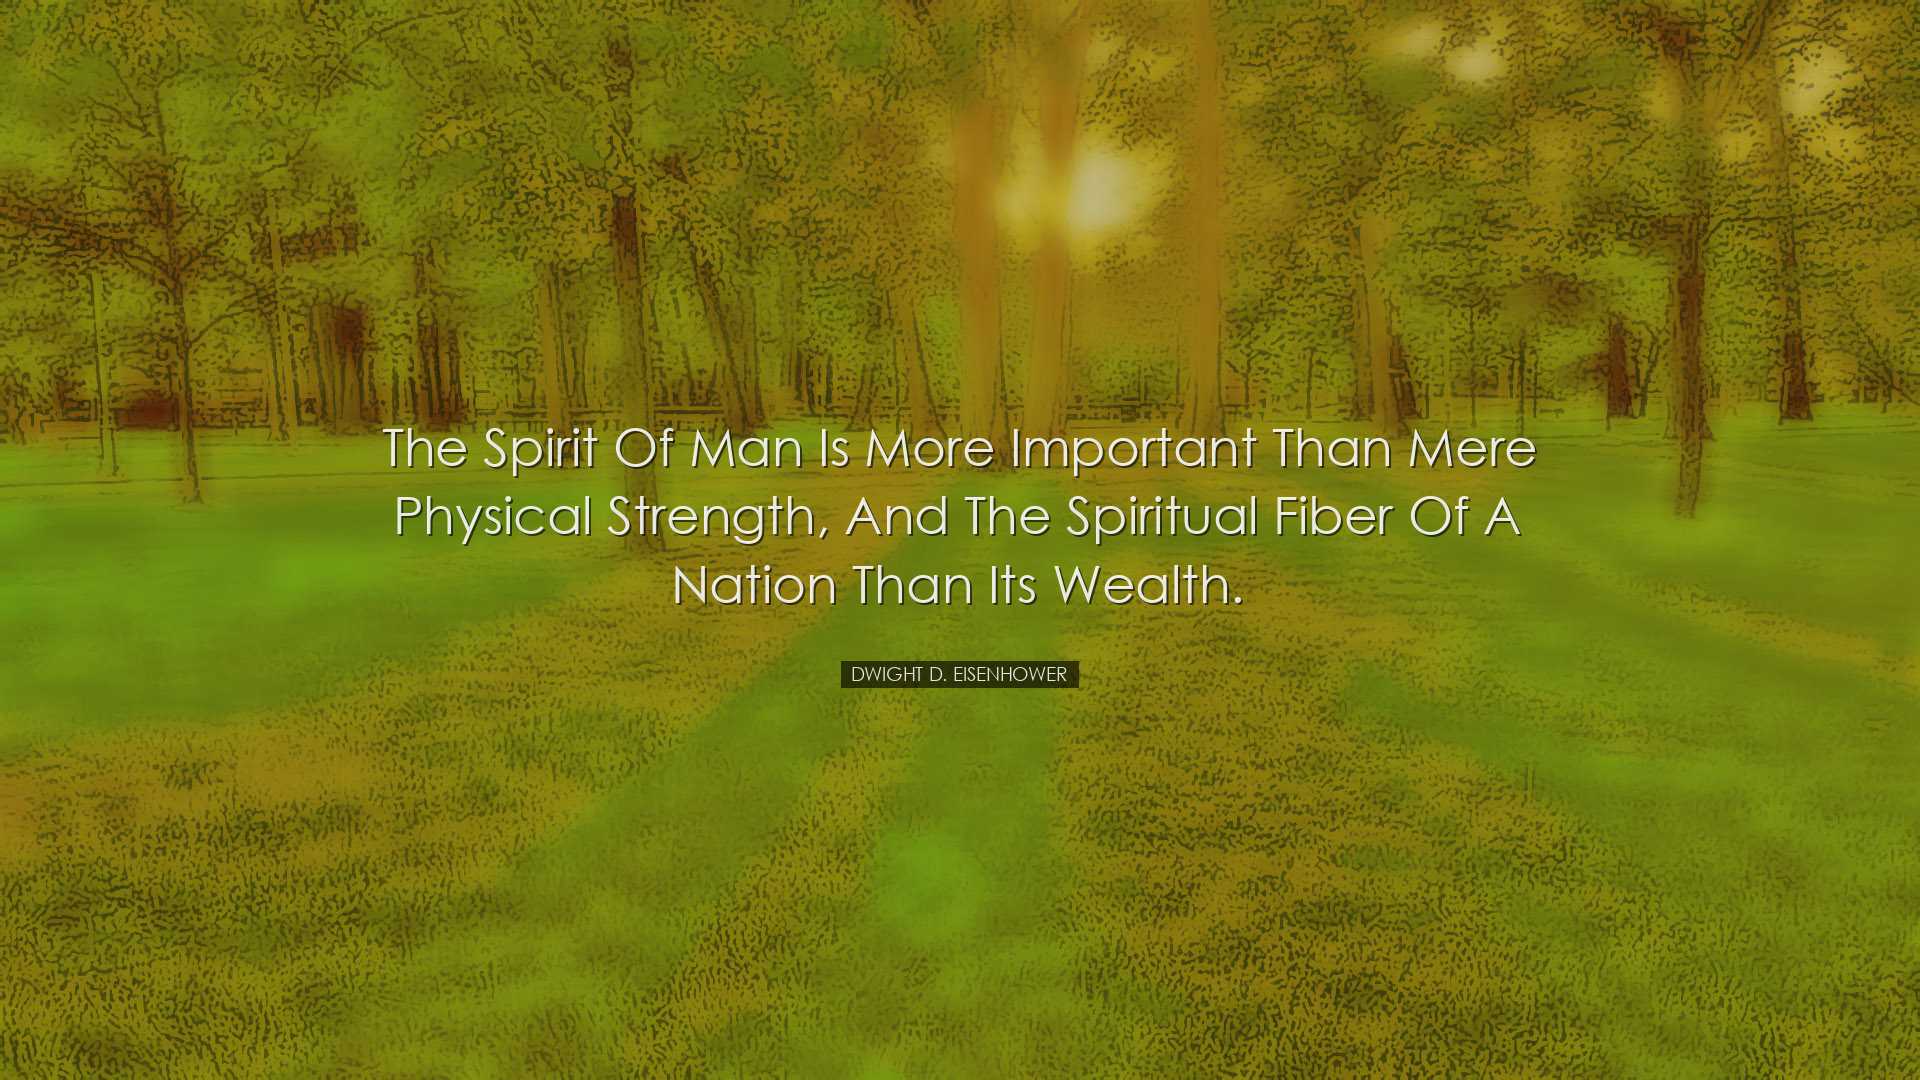 The spirit of man is more important than mere physical strength, a